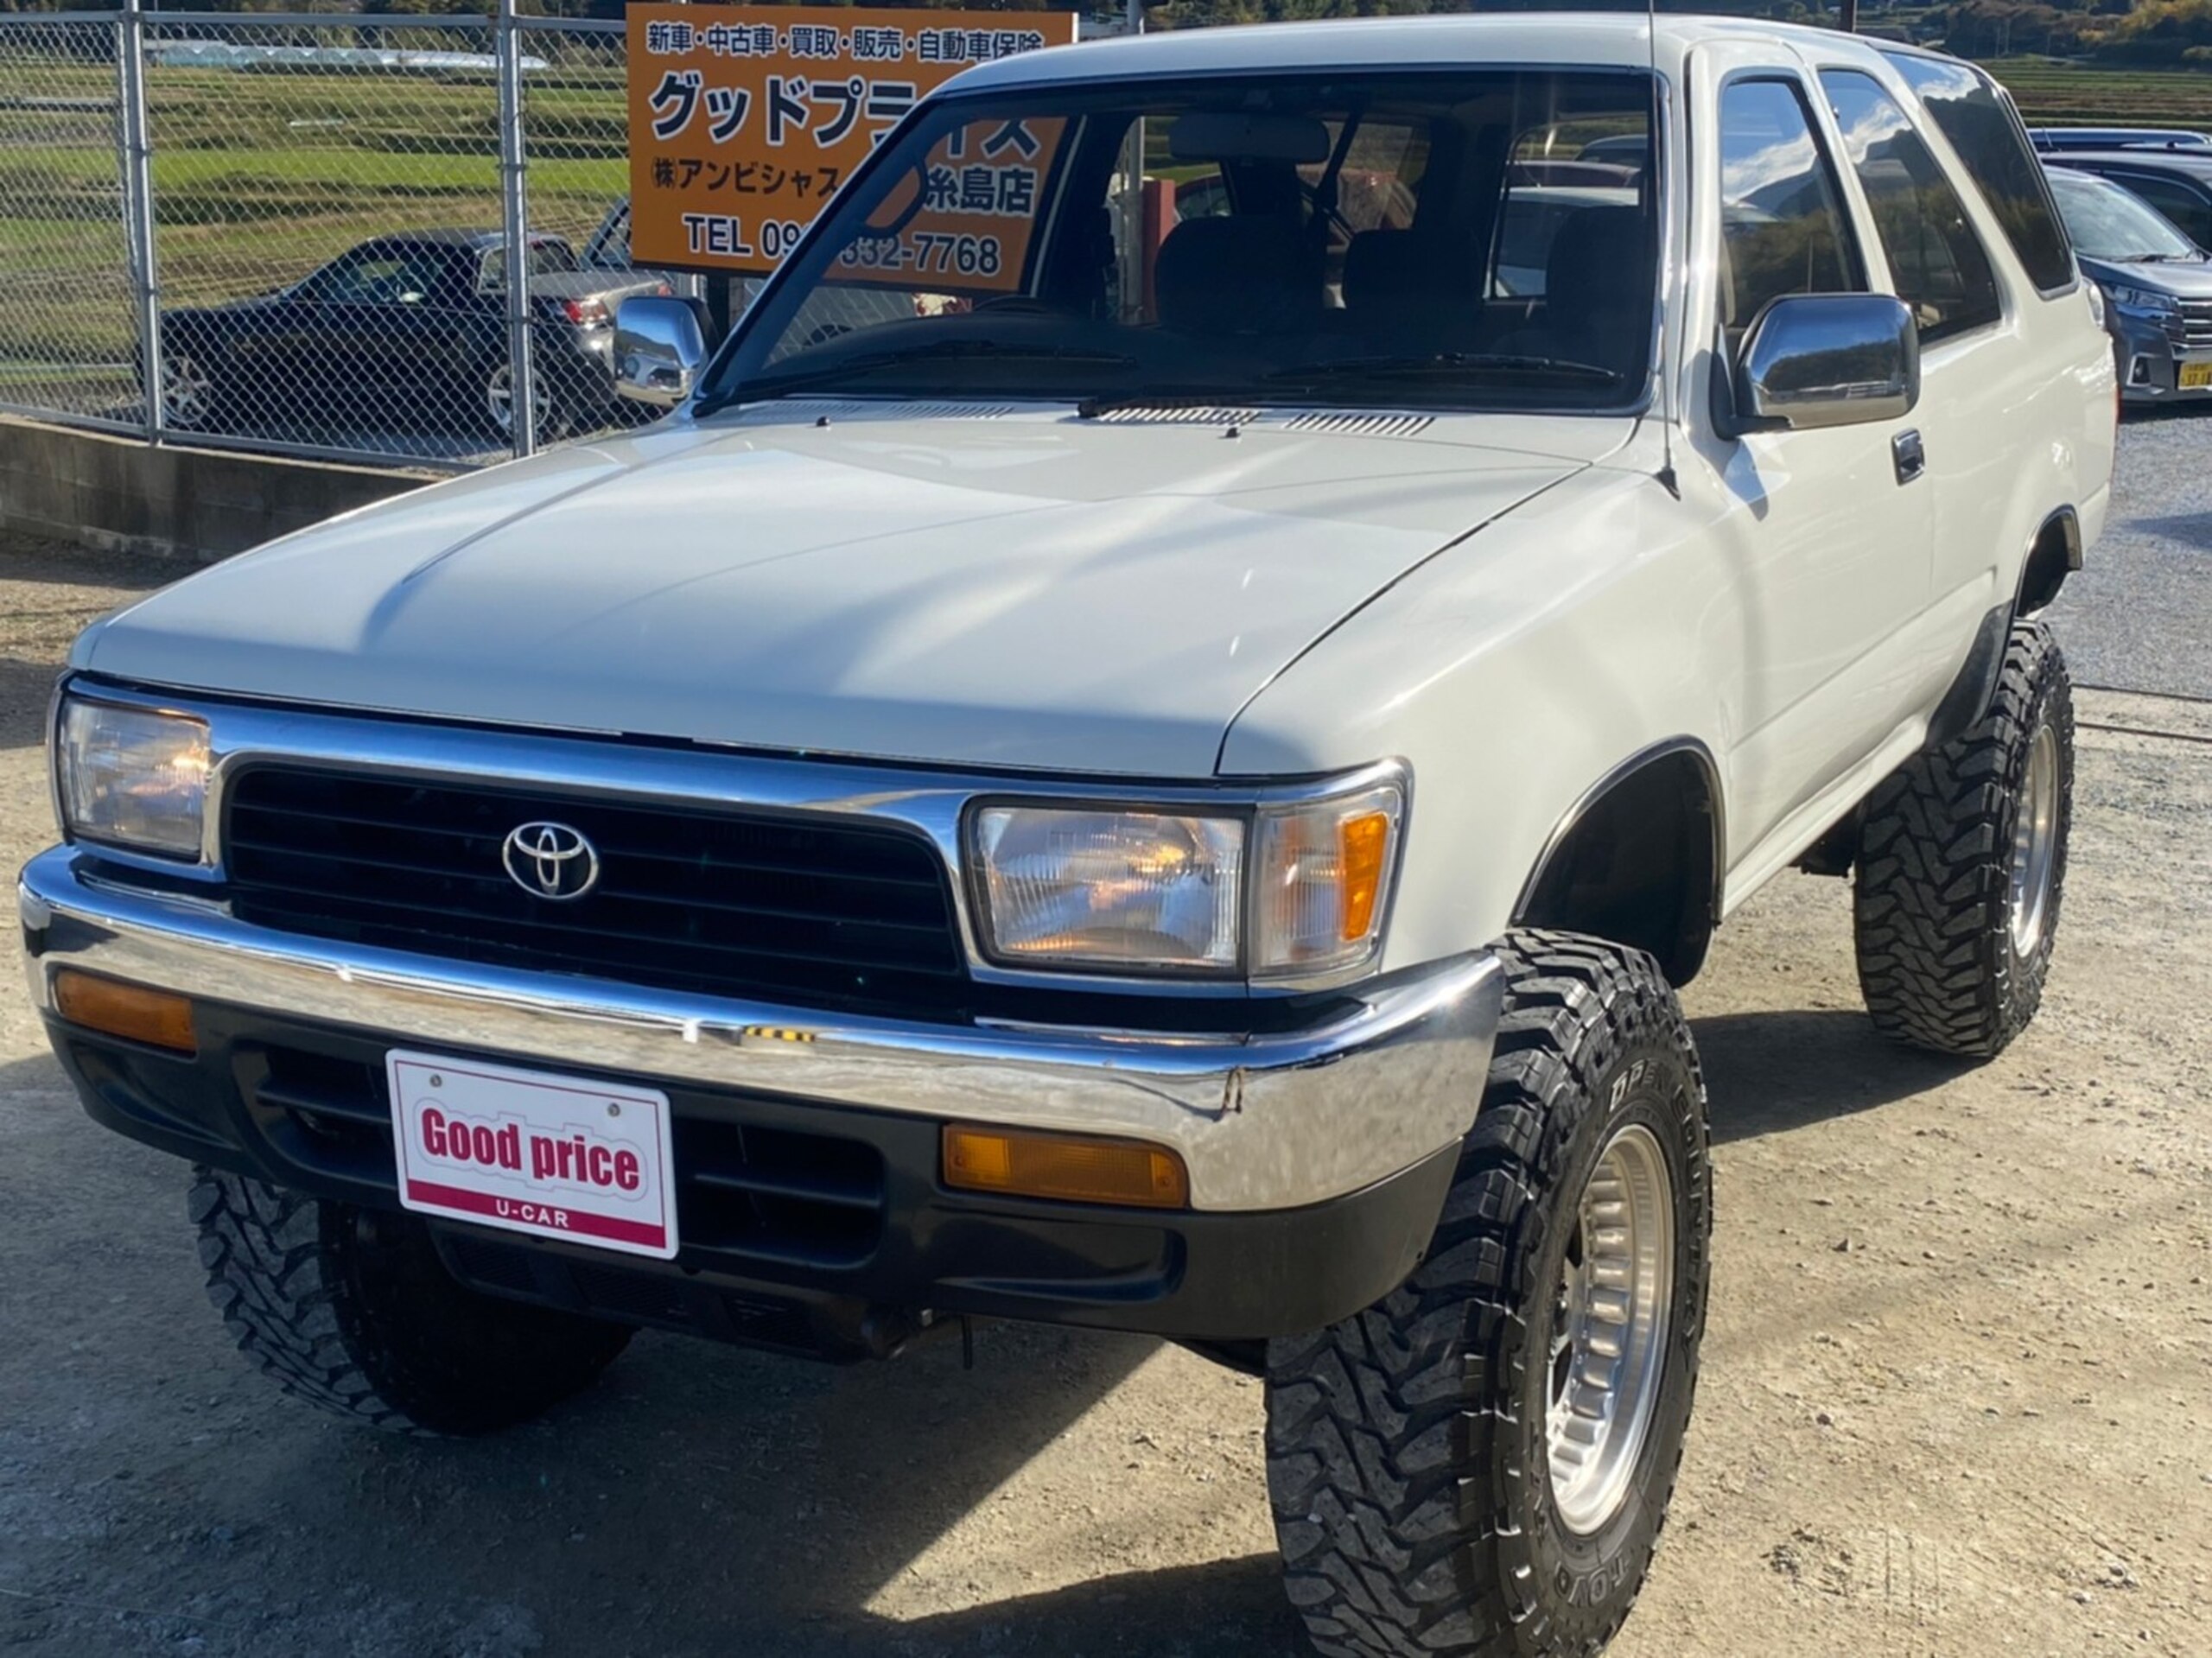 Used TOYOTA HILUX SURF 1993 CFJ8072500 in good condition for sale